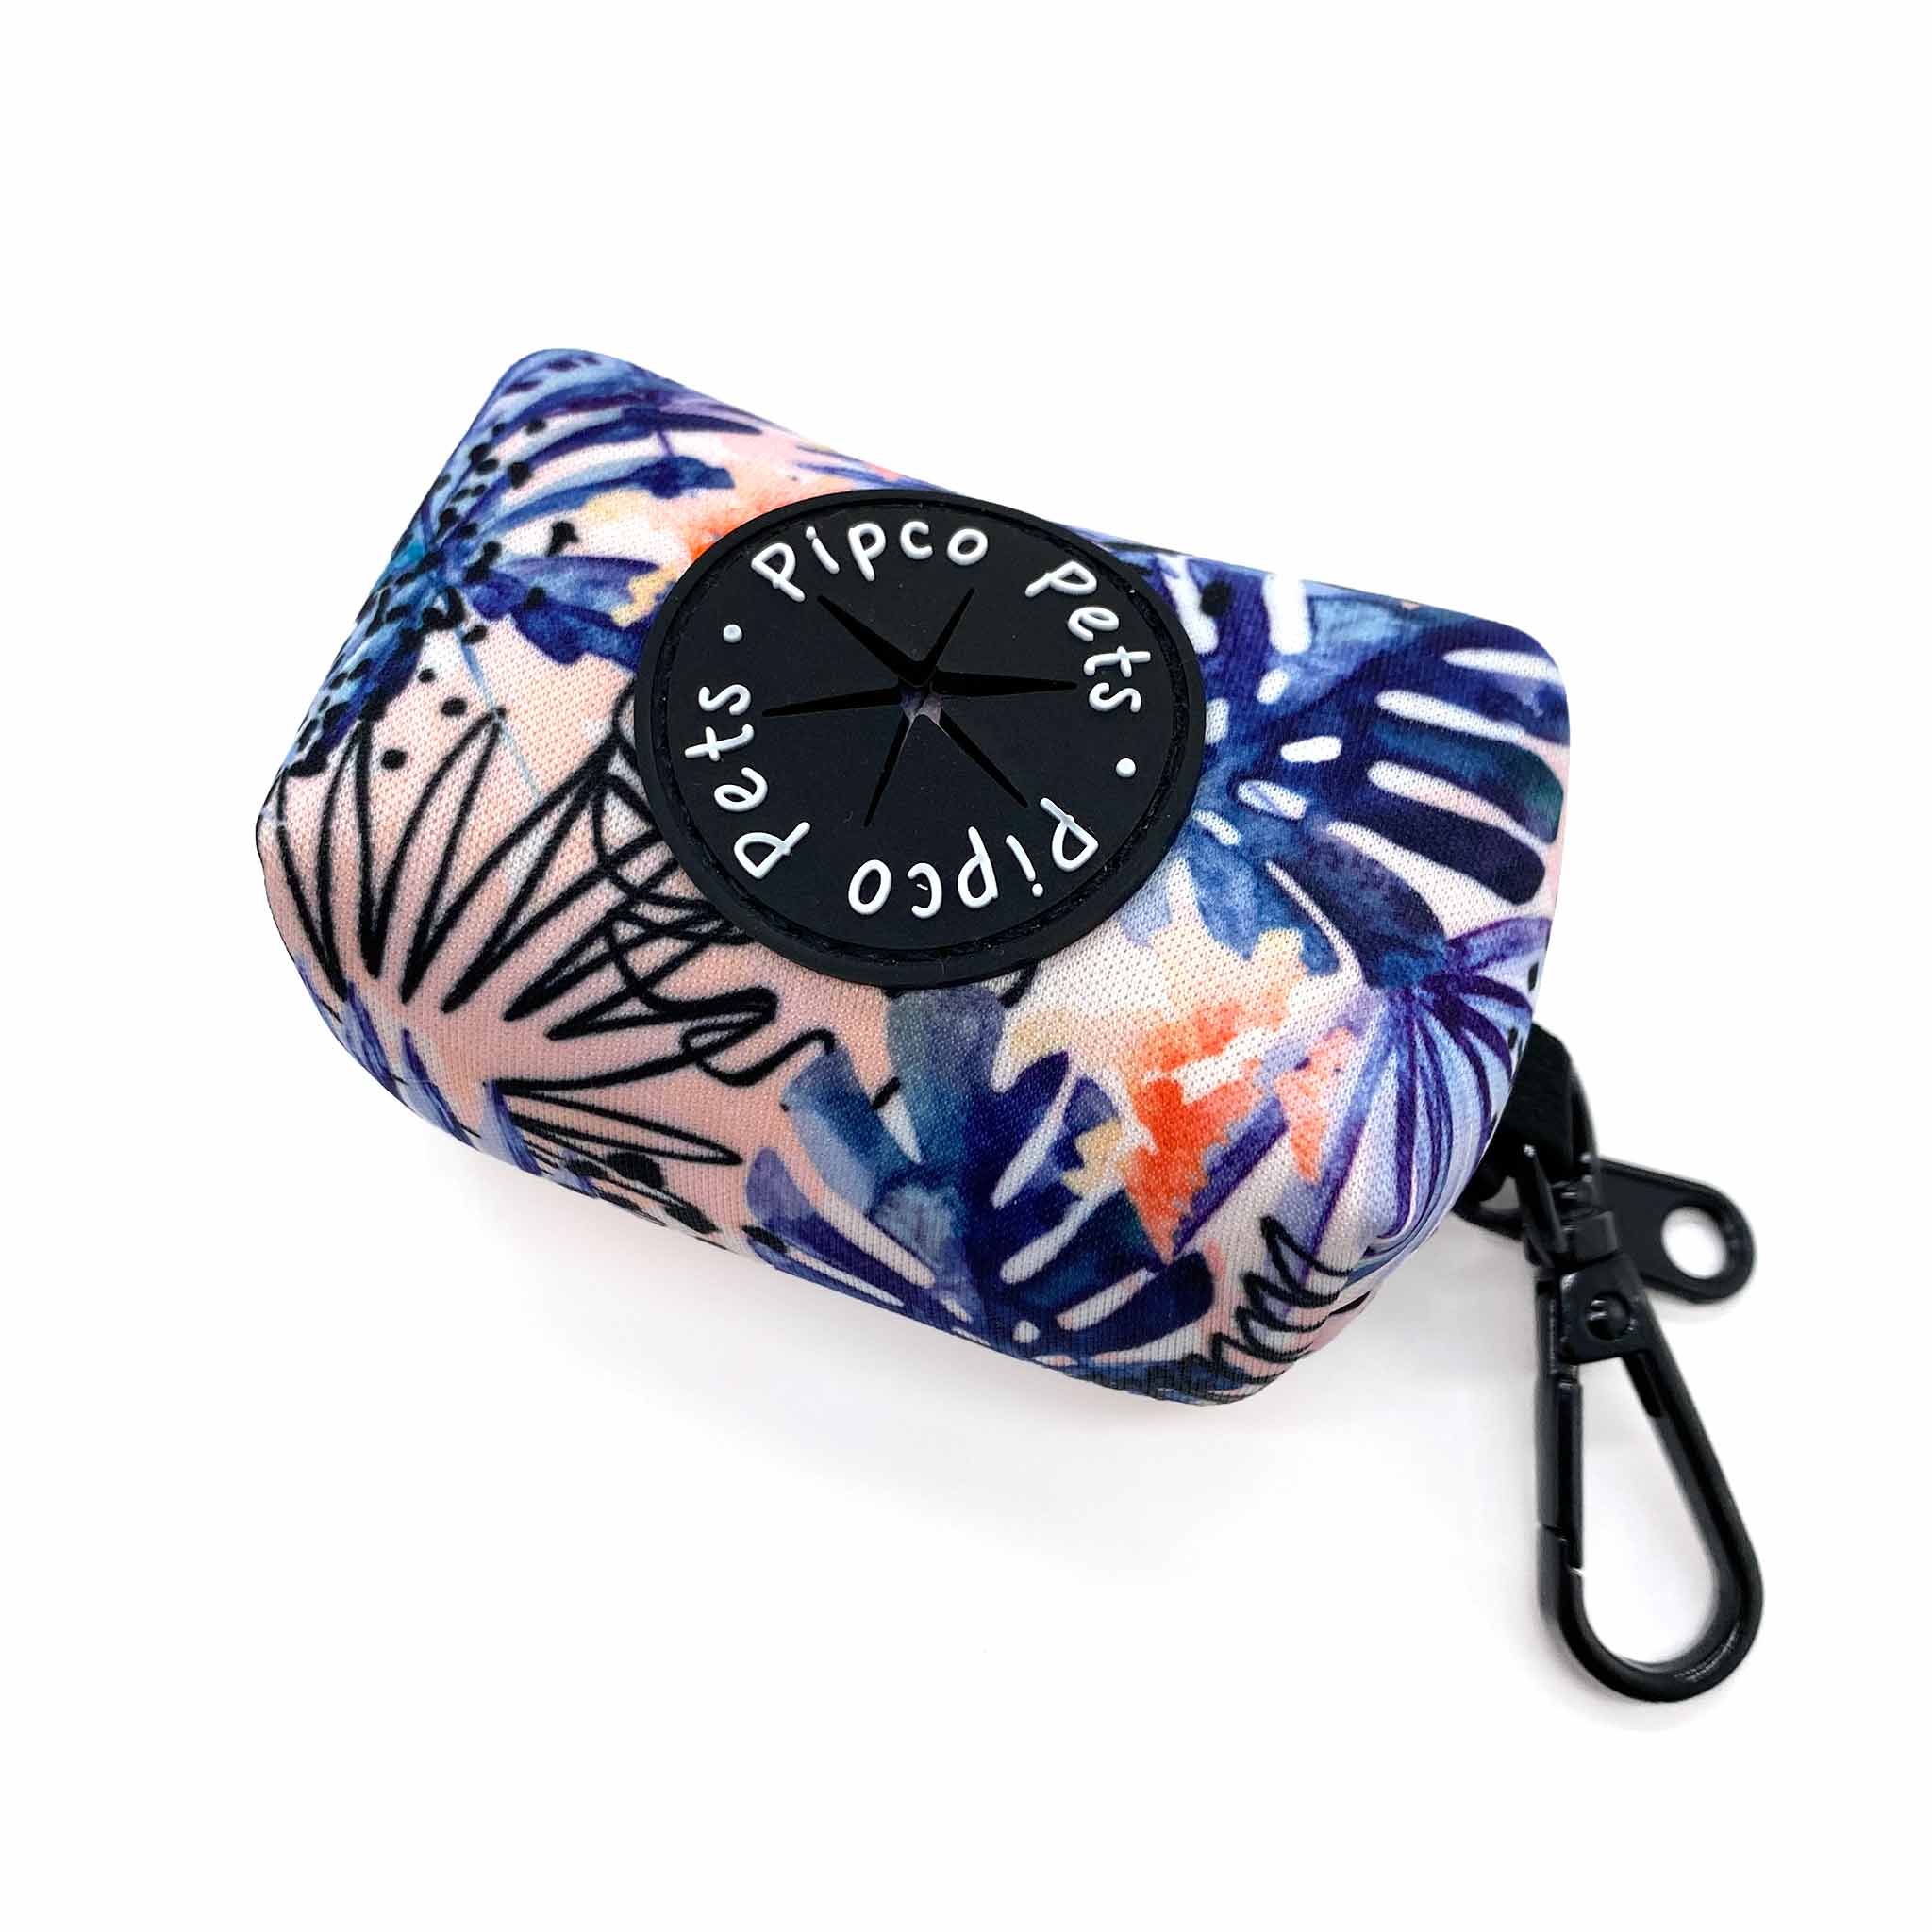 Pipco Pets dog poo bag dispenser with Tropic Fronds tropical leaves print pattern in blue